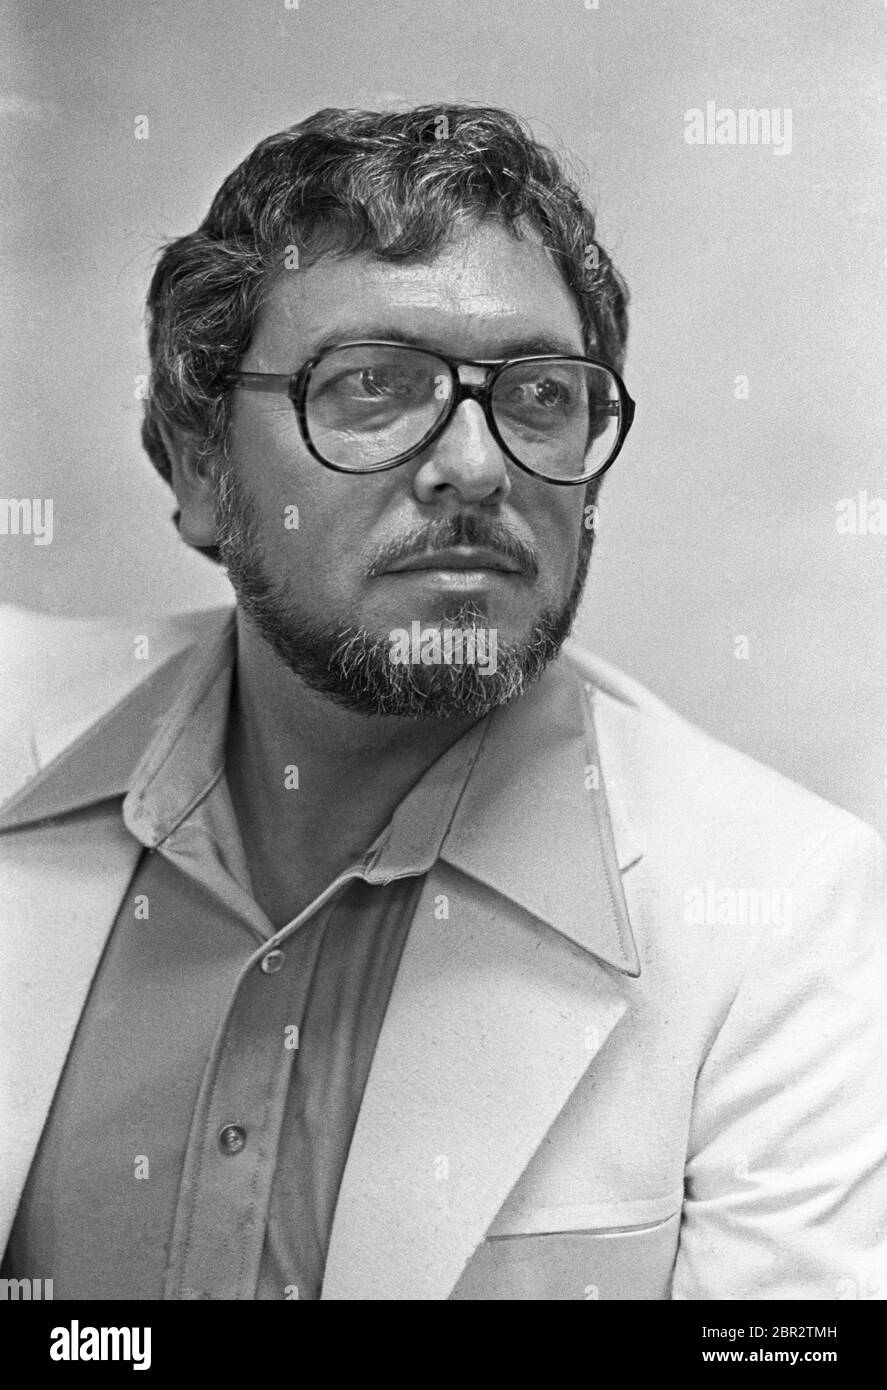 A portrait of Robert Mondragon, native New Mexican, fomer lieutenant Governor of New Mexico for two terms in the 1970s, and now an activist and musician. Circa 1973, black and white Stock Photo